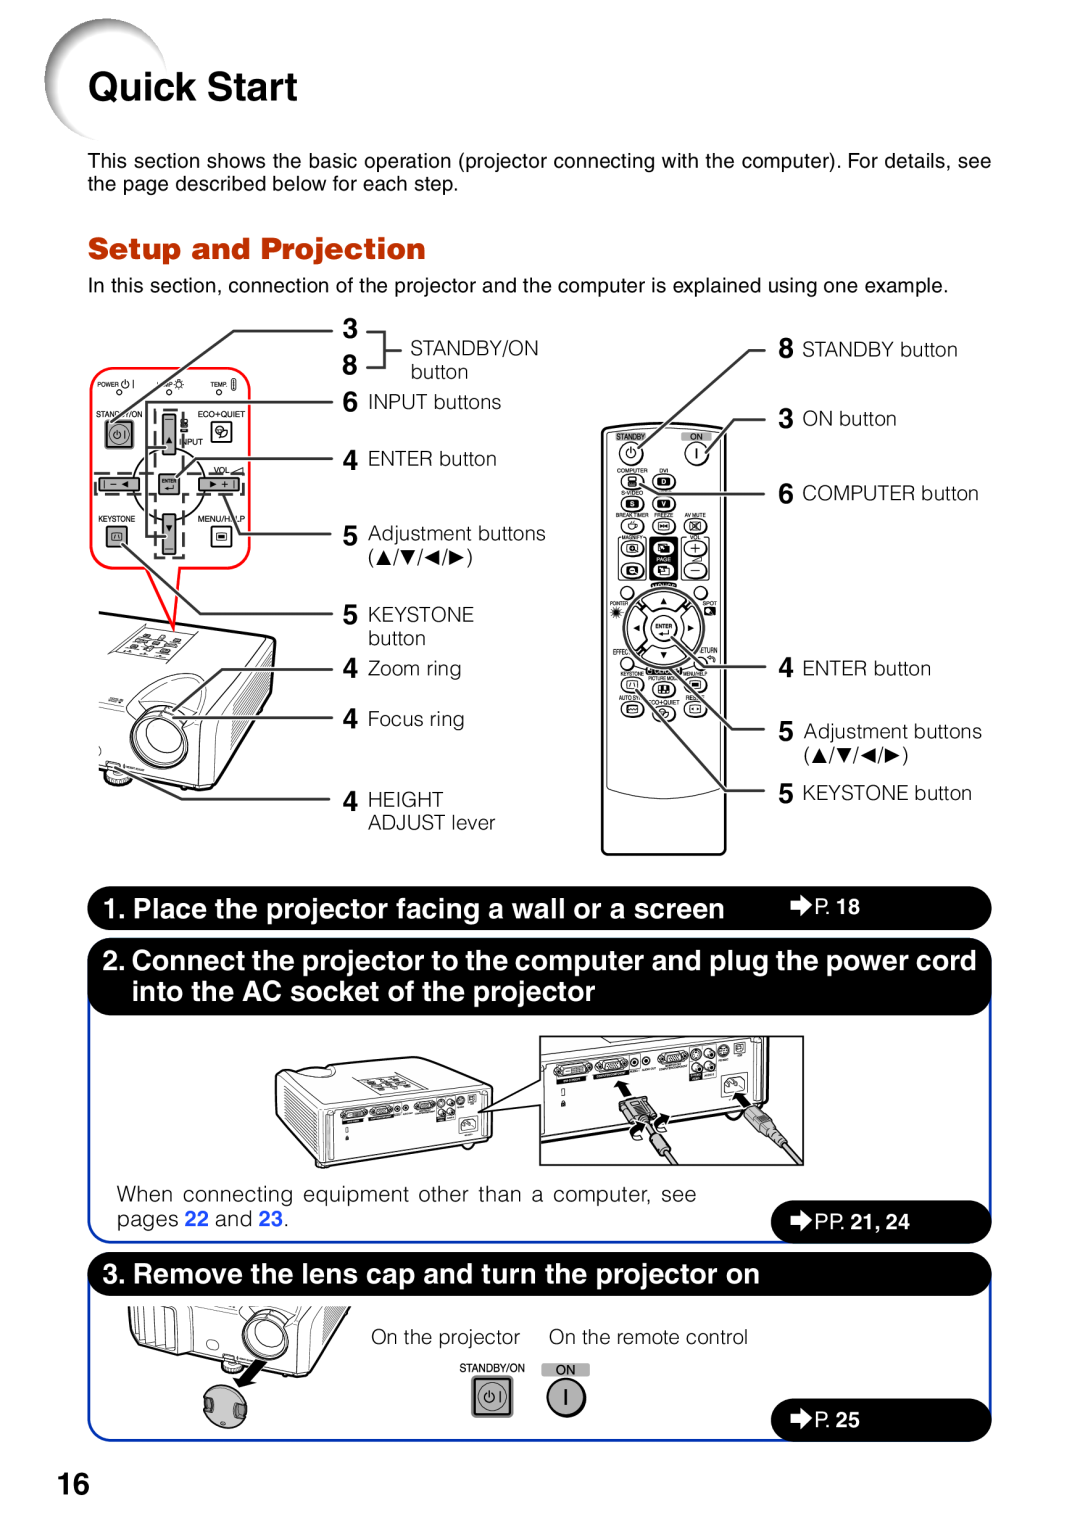 Sharp XR-32X quick start Quick Start, Setup and Projection, Place the projector facing a wall or a screen, PP. 21 